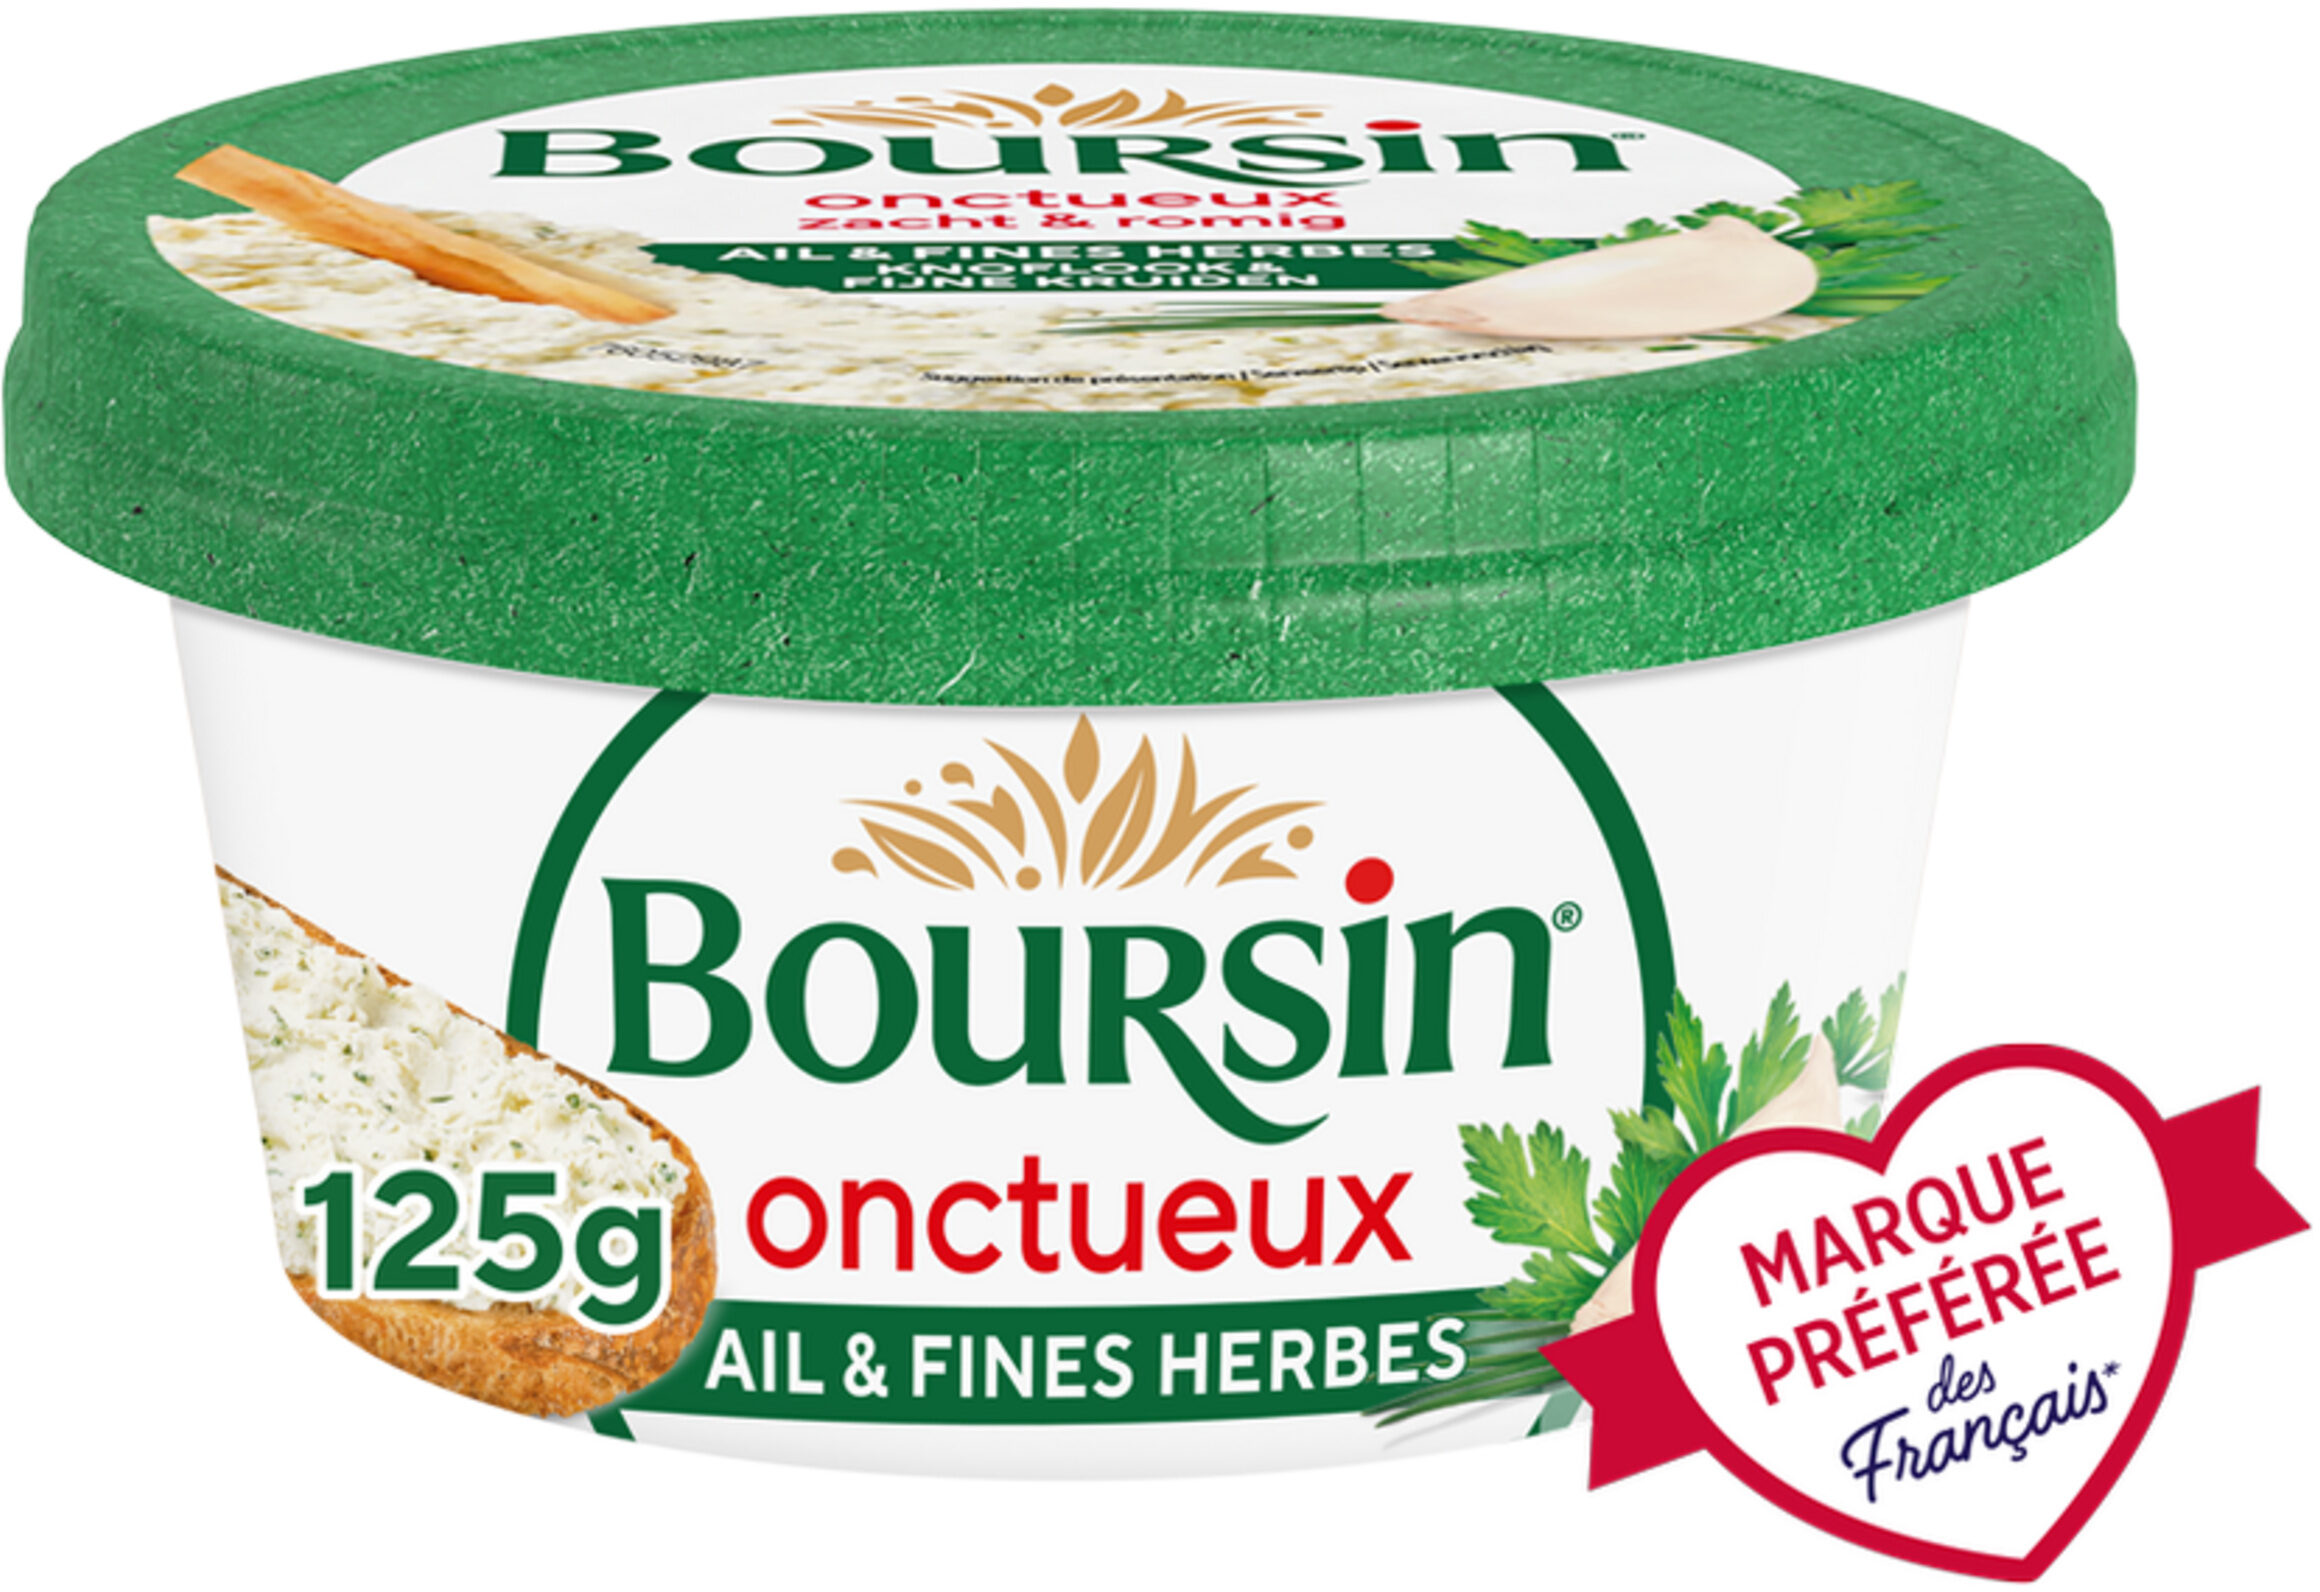 Boursin® Onctueux Ail & Fines Herbes - Product - fr